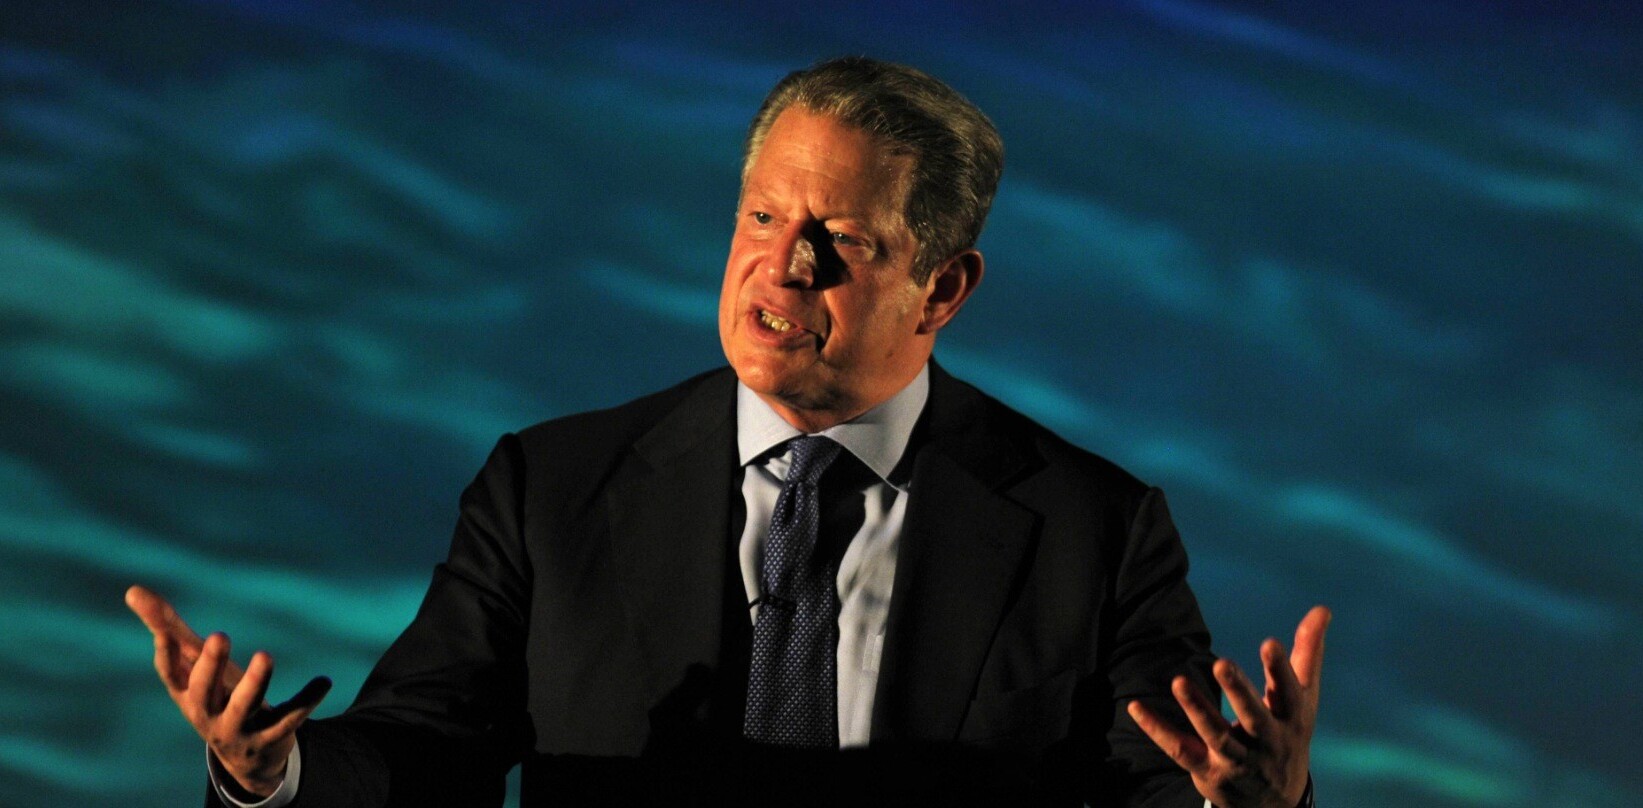 Apple board member Al Gore uses options to snap up 59k shares now worth $29.2M for only $7.48 each